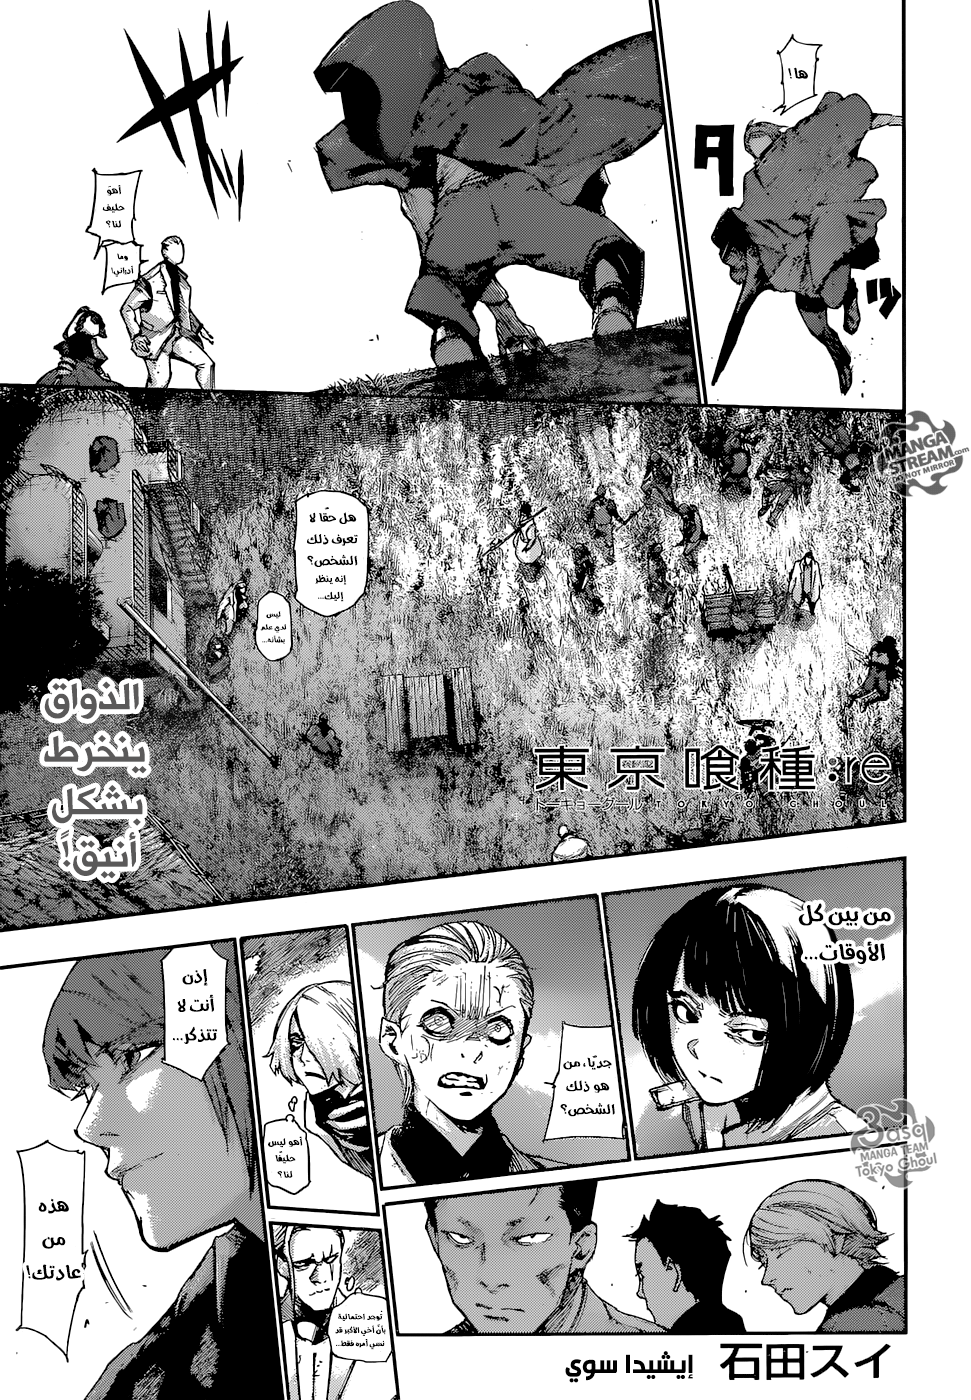 Tokyo Ghoul: Re: Chapter 94 - Page 1